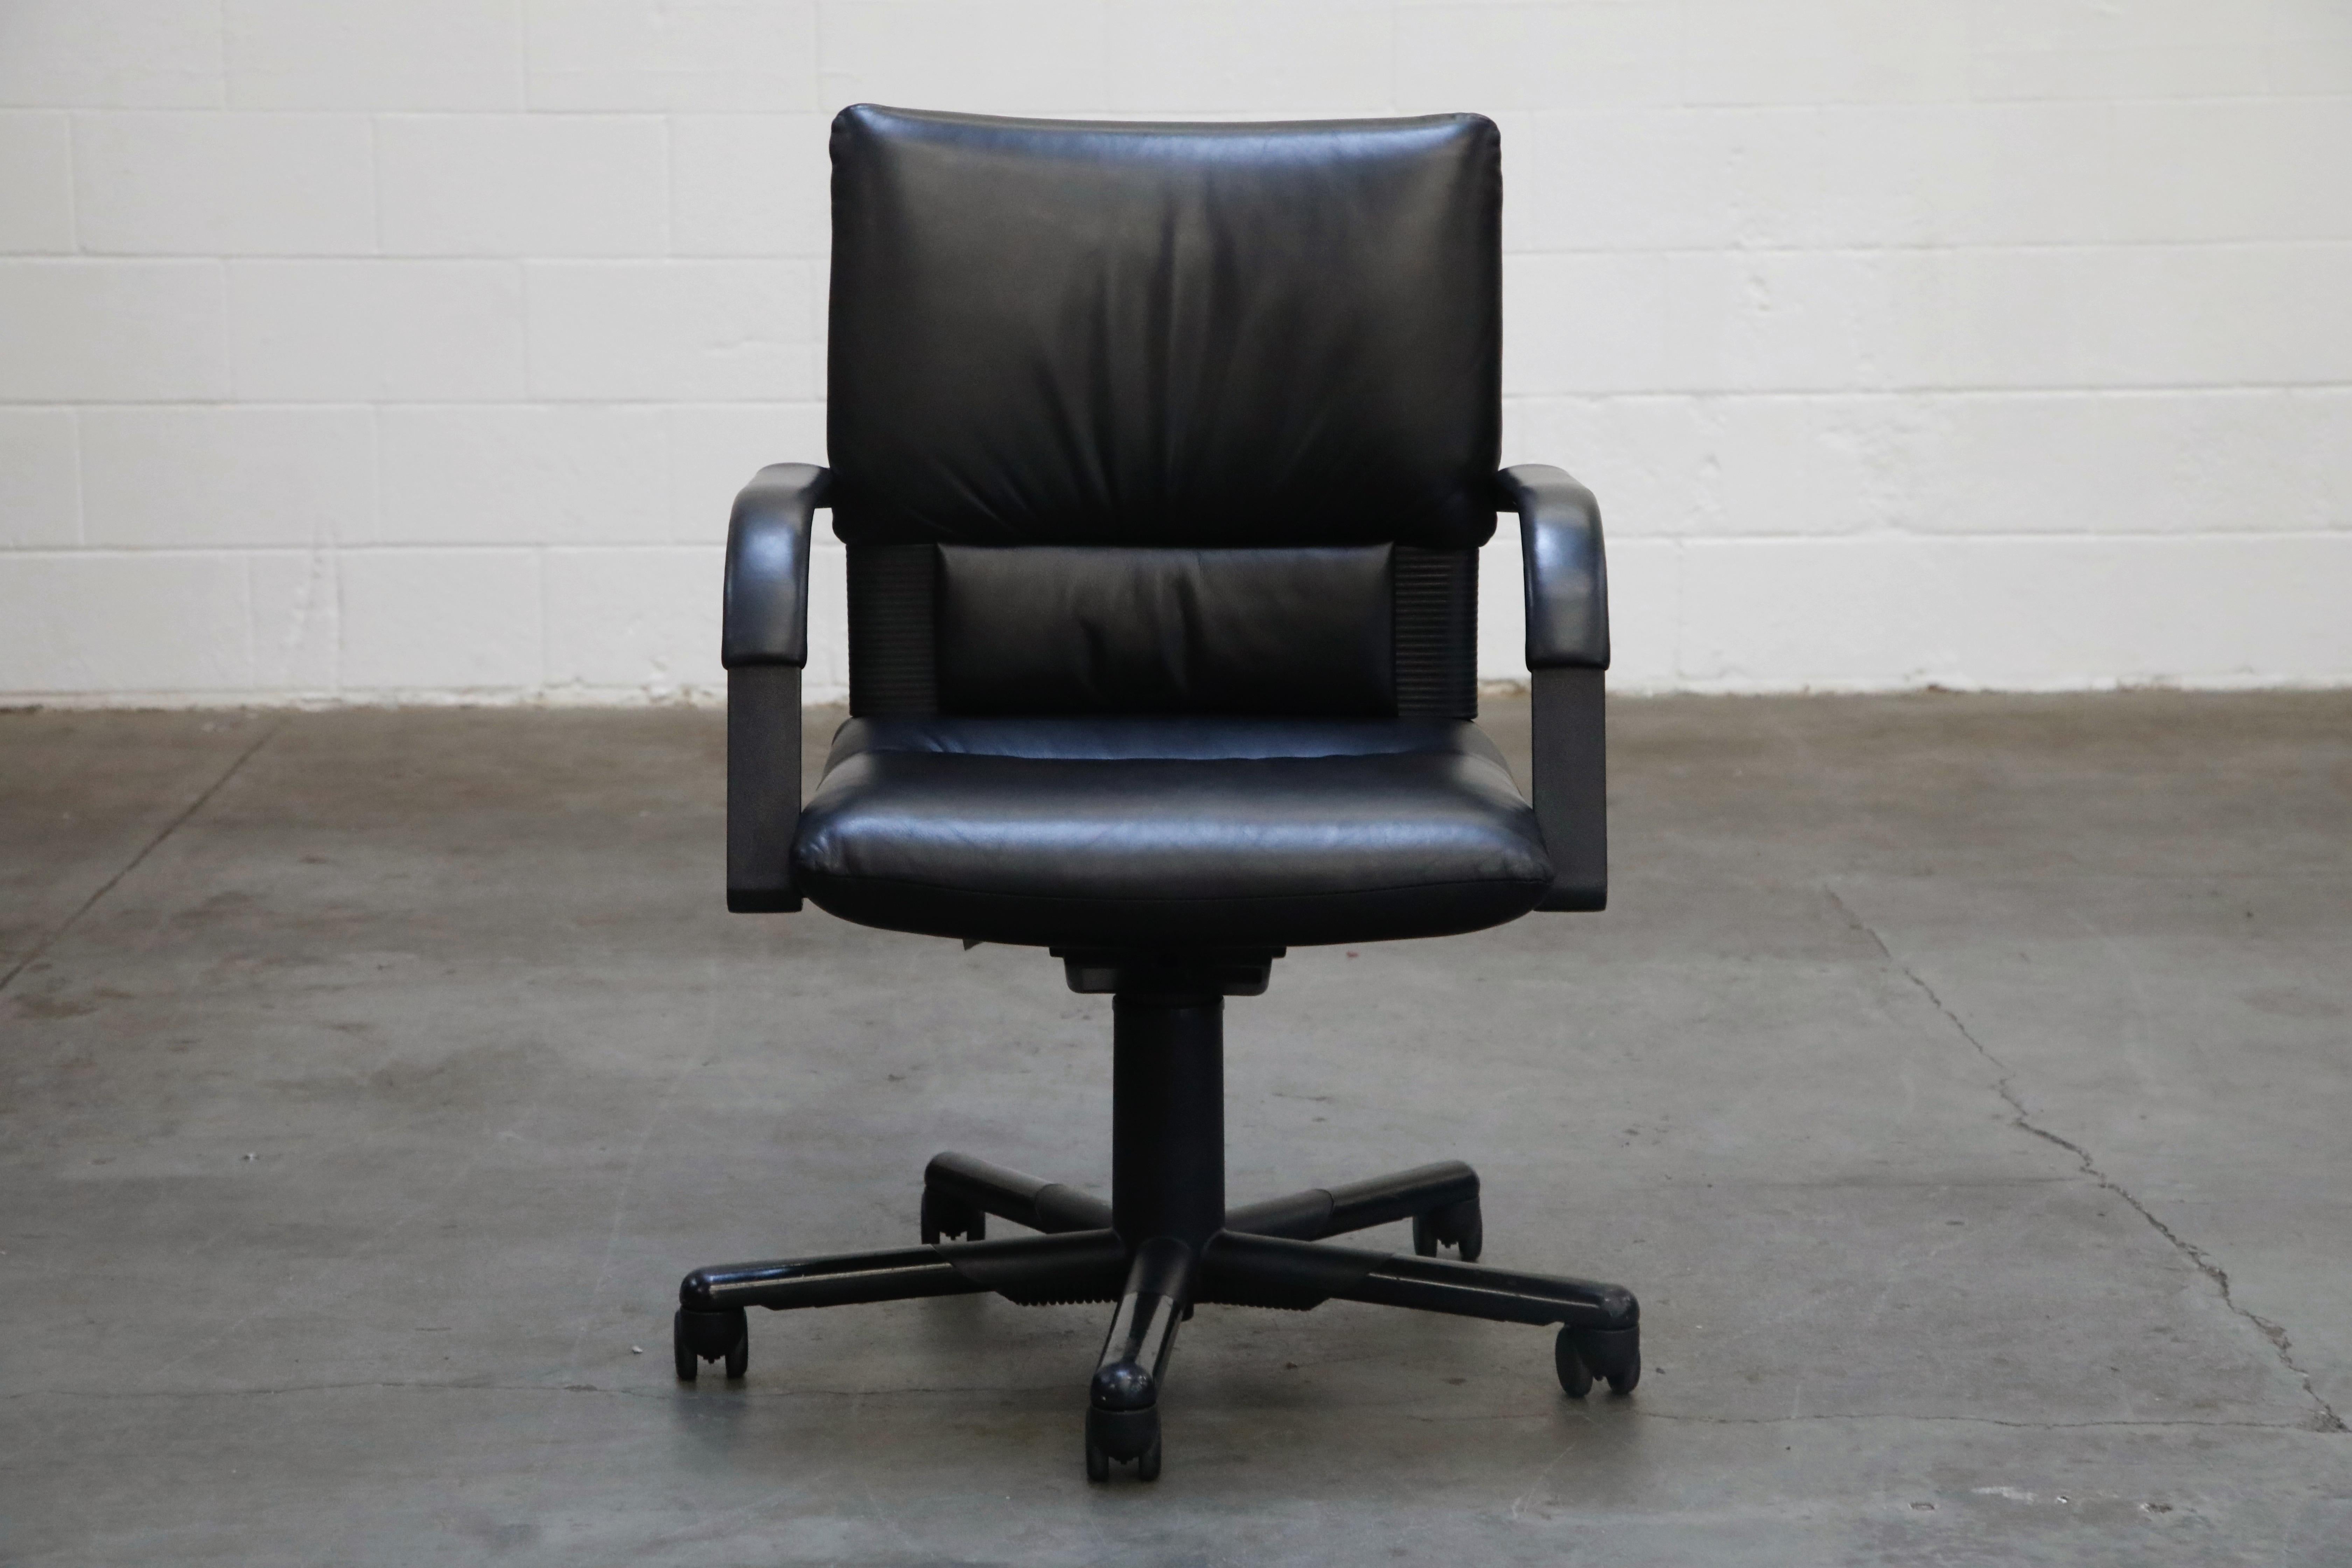 A spectacular set of Mario Bellini signed desk chairs for the Vitra, dated 1992 production. This Post Modern set of task chairs feature soft and supple black leather in excellent condition, five star height adjustable bases on casters, and are